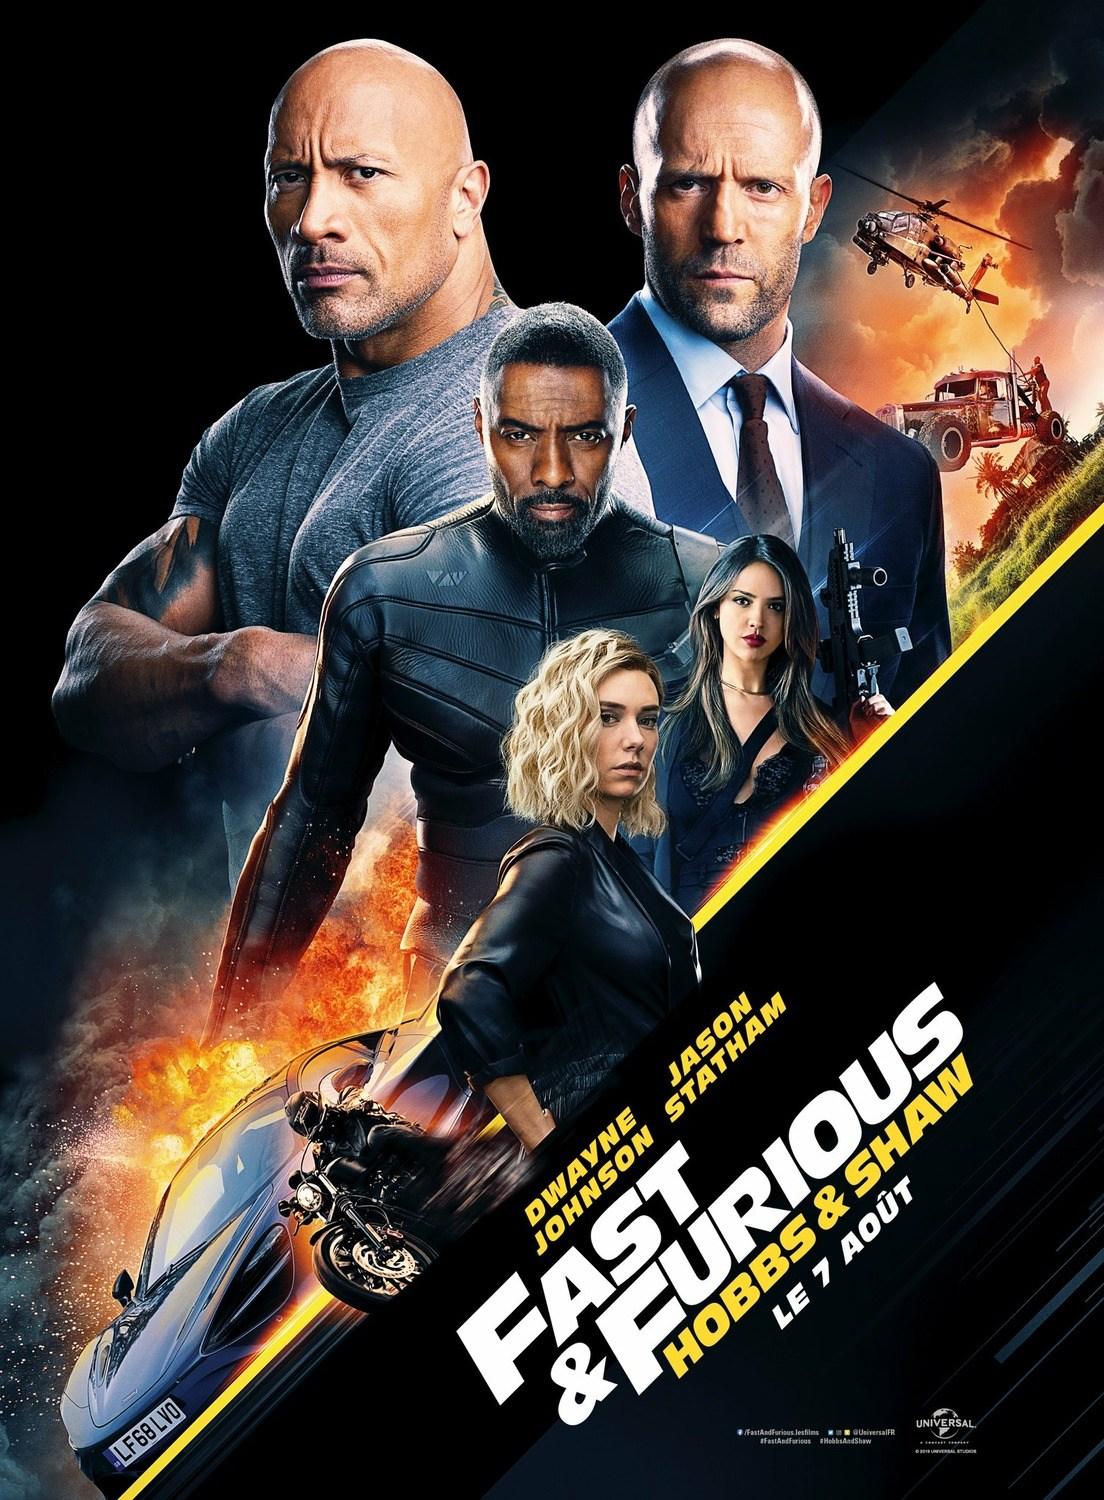 Fast and Furious Presents Hobbs and Shaw Movie Poster, Teaser Trailer